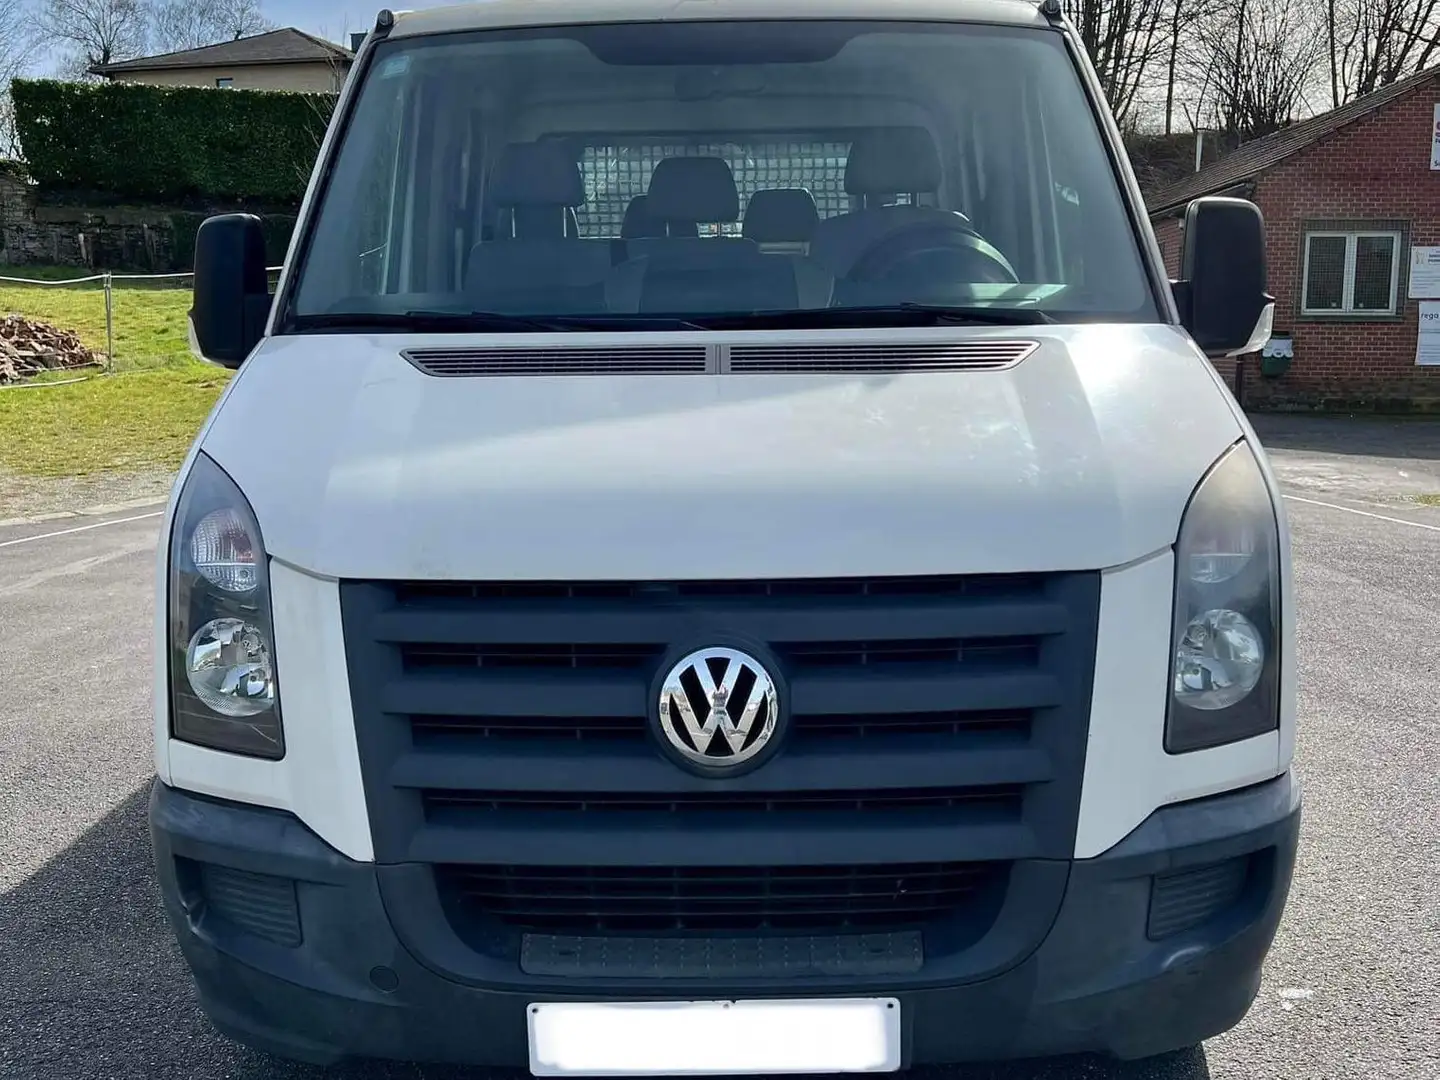 Volkswagen Crafter 2.5 TDI / UTILITAIRE - 7 places / Euro 5 Blanc - 2